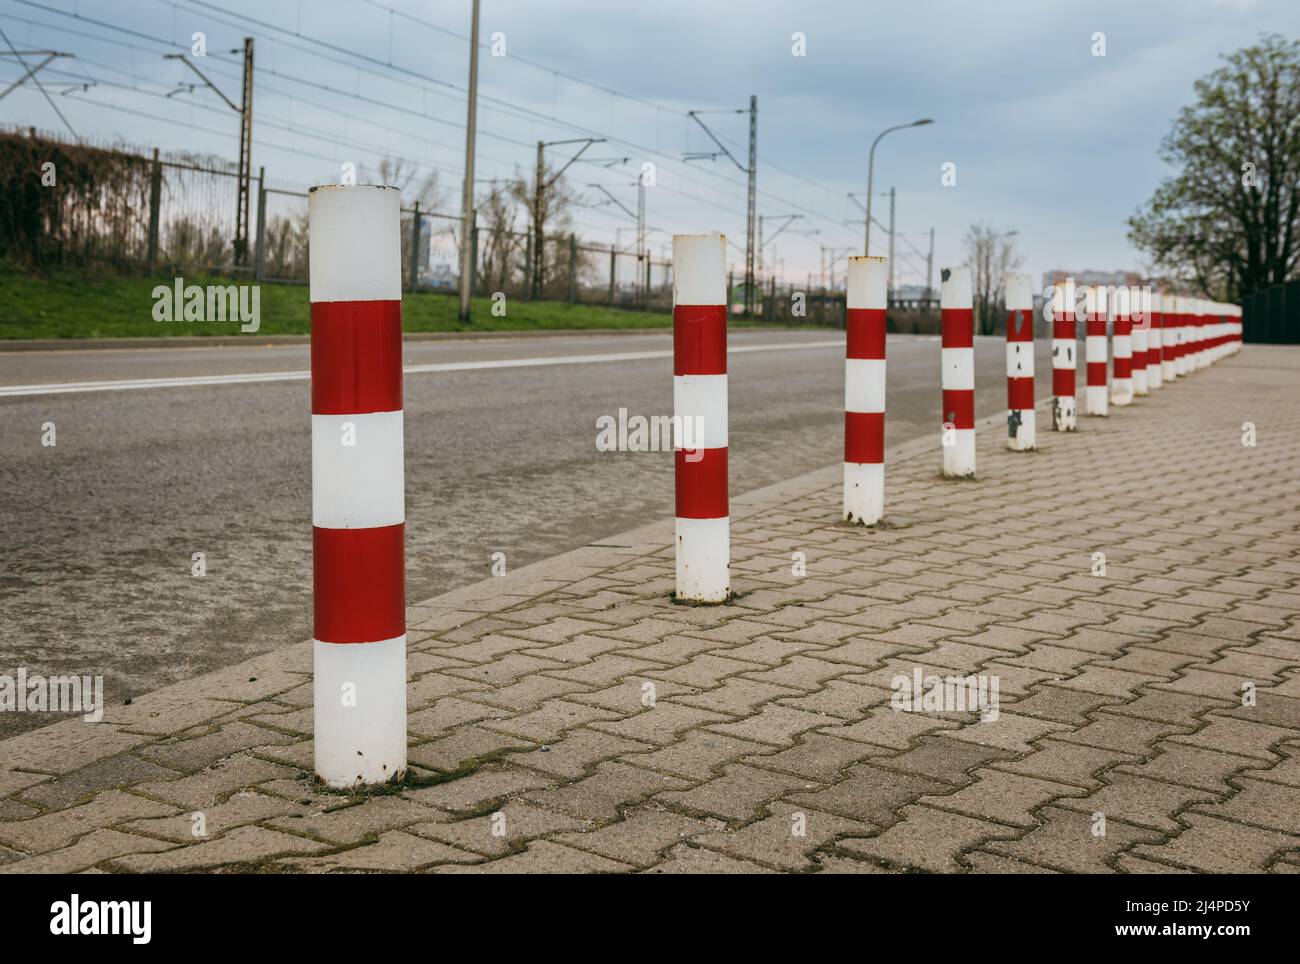 Metal poles are located on the edge of the sidewalk. These are painted in red and white stripes. Stock Photo